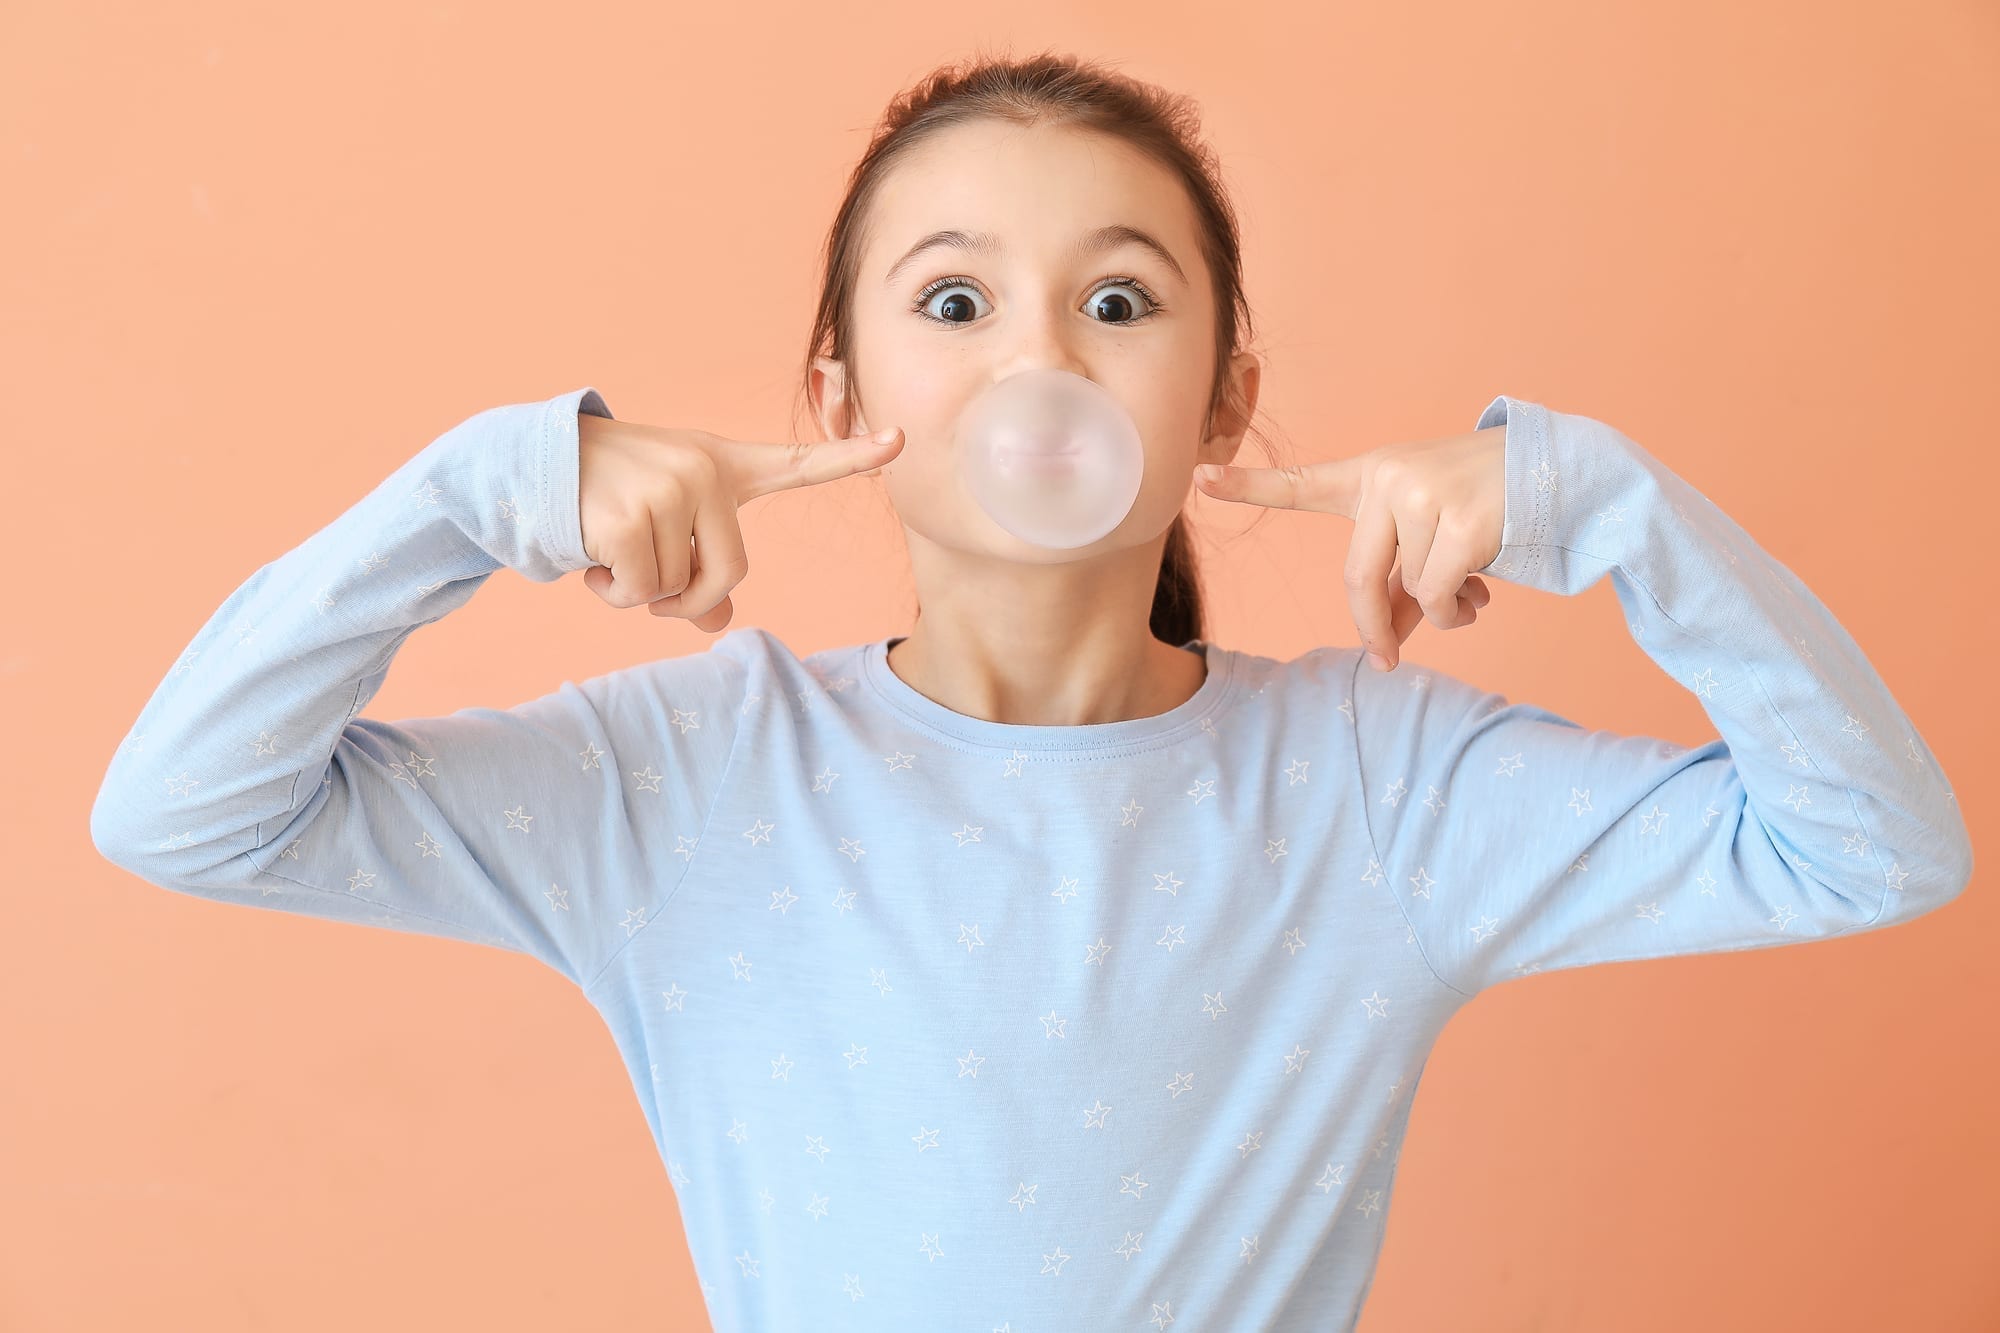 little girl blowing bubble with gum on peach background